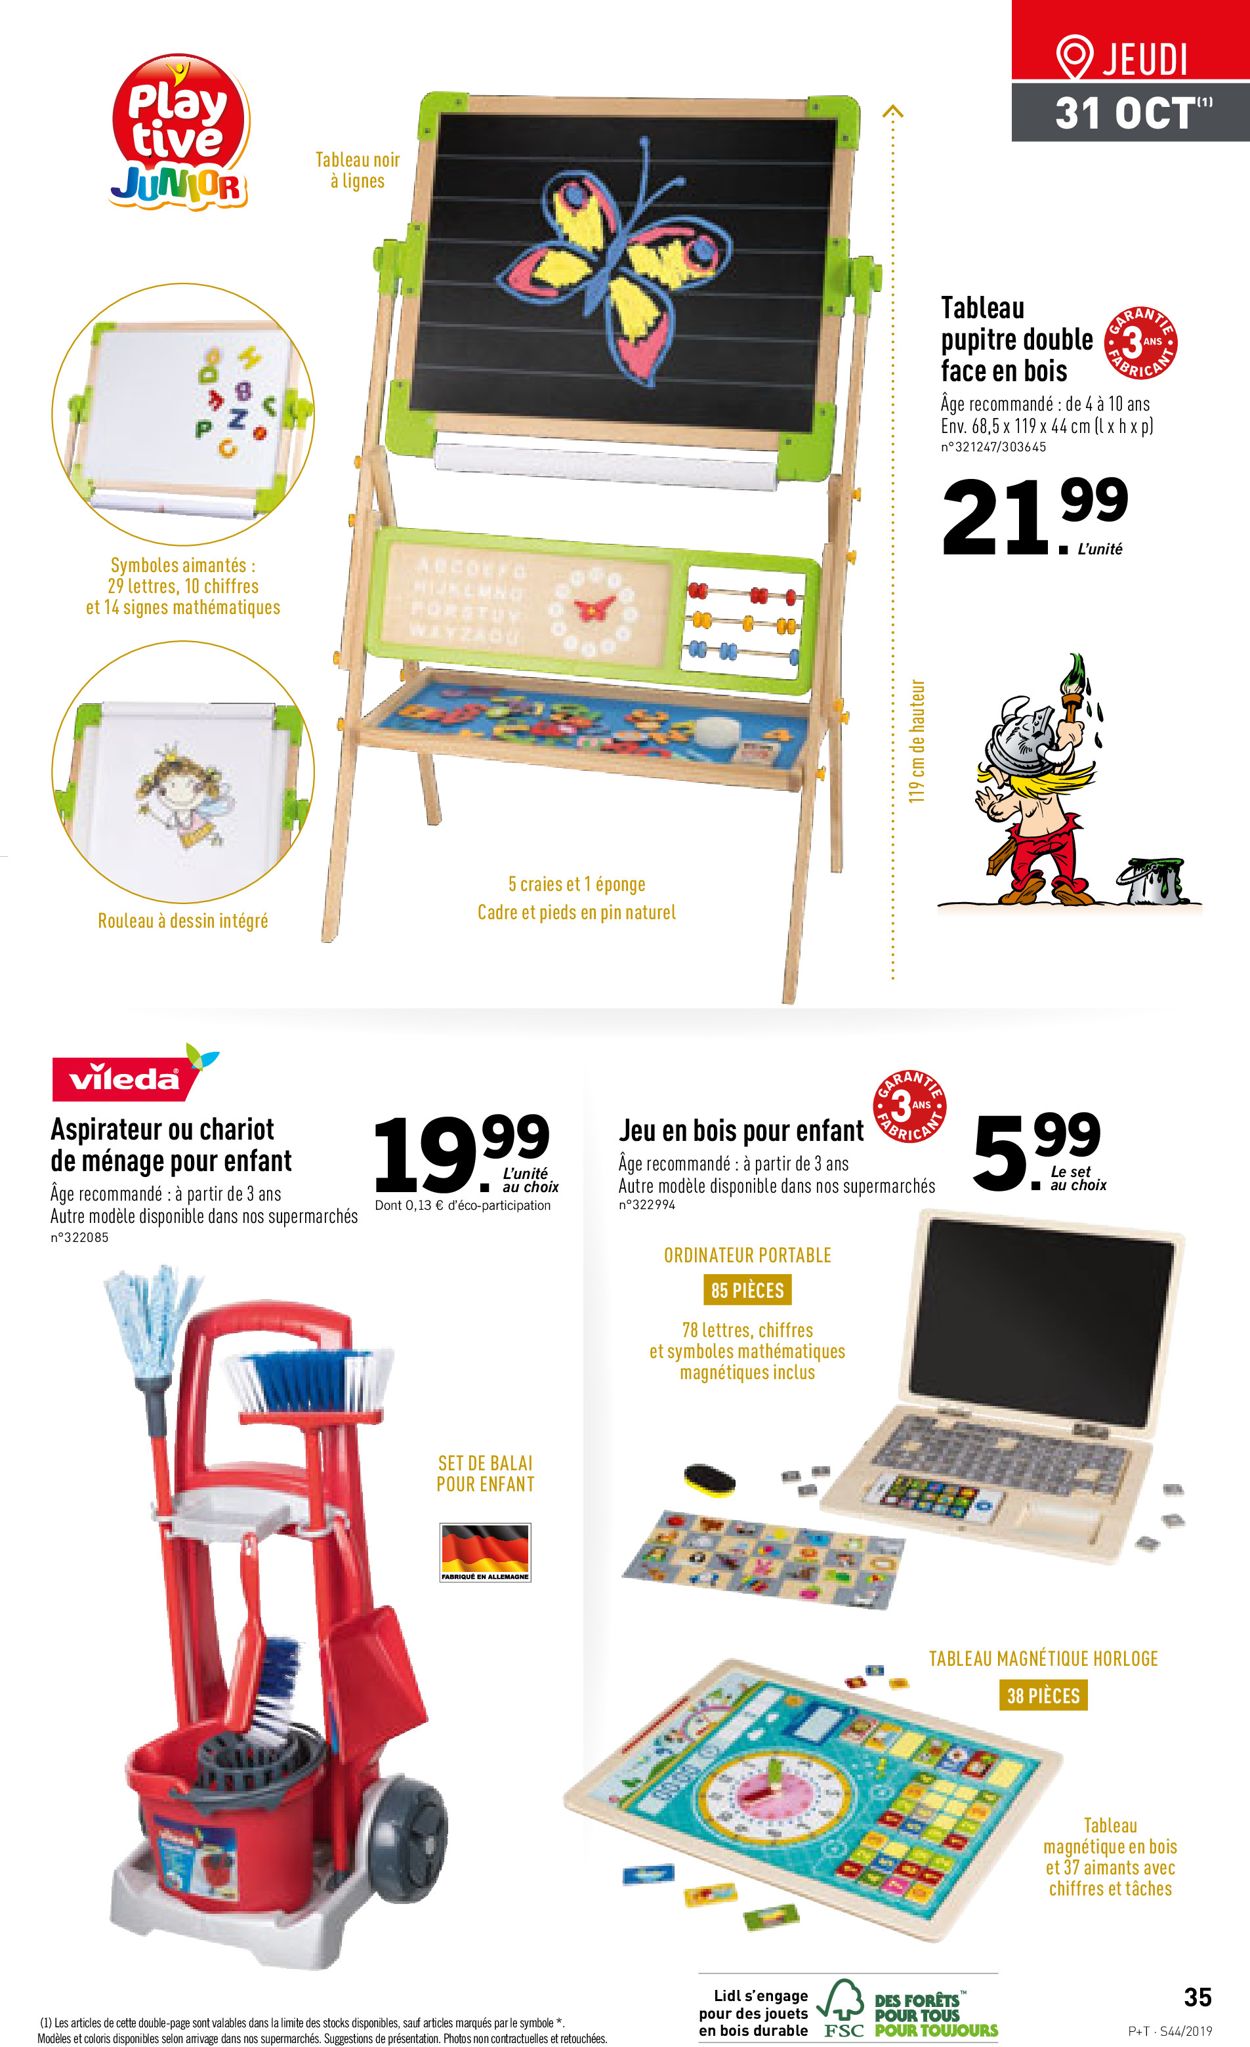 Lidl Catalogue - 30.10-05.11.2019 (Page 35)